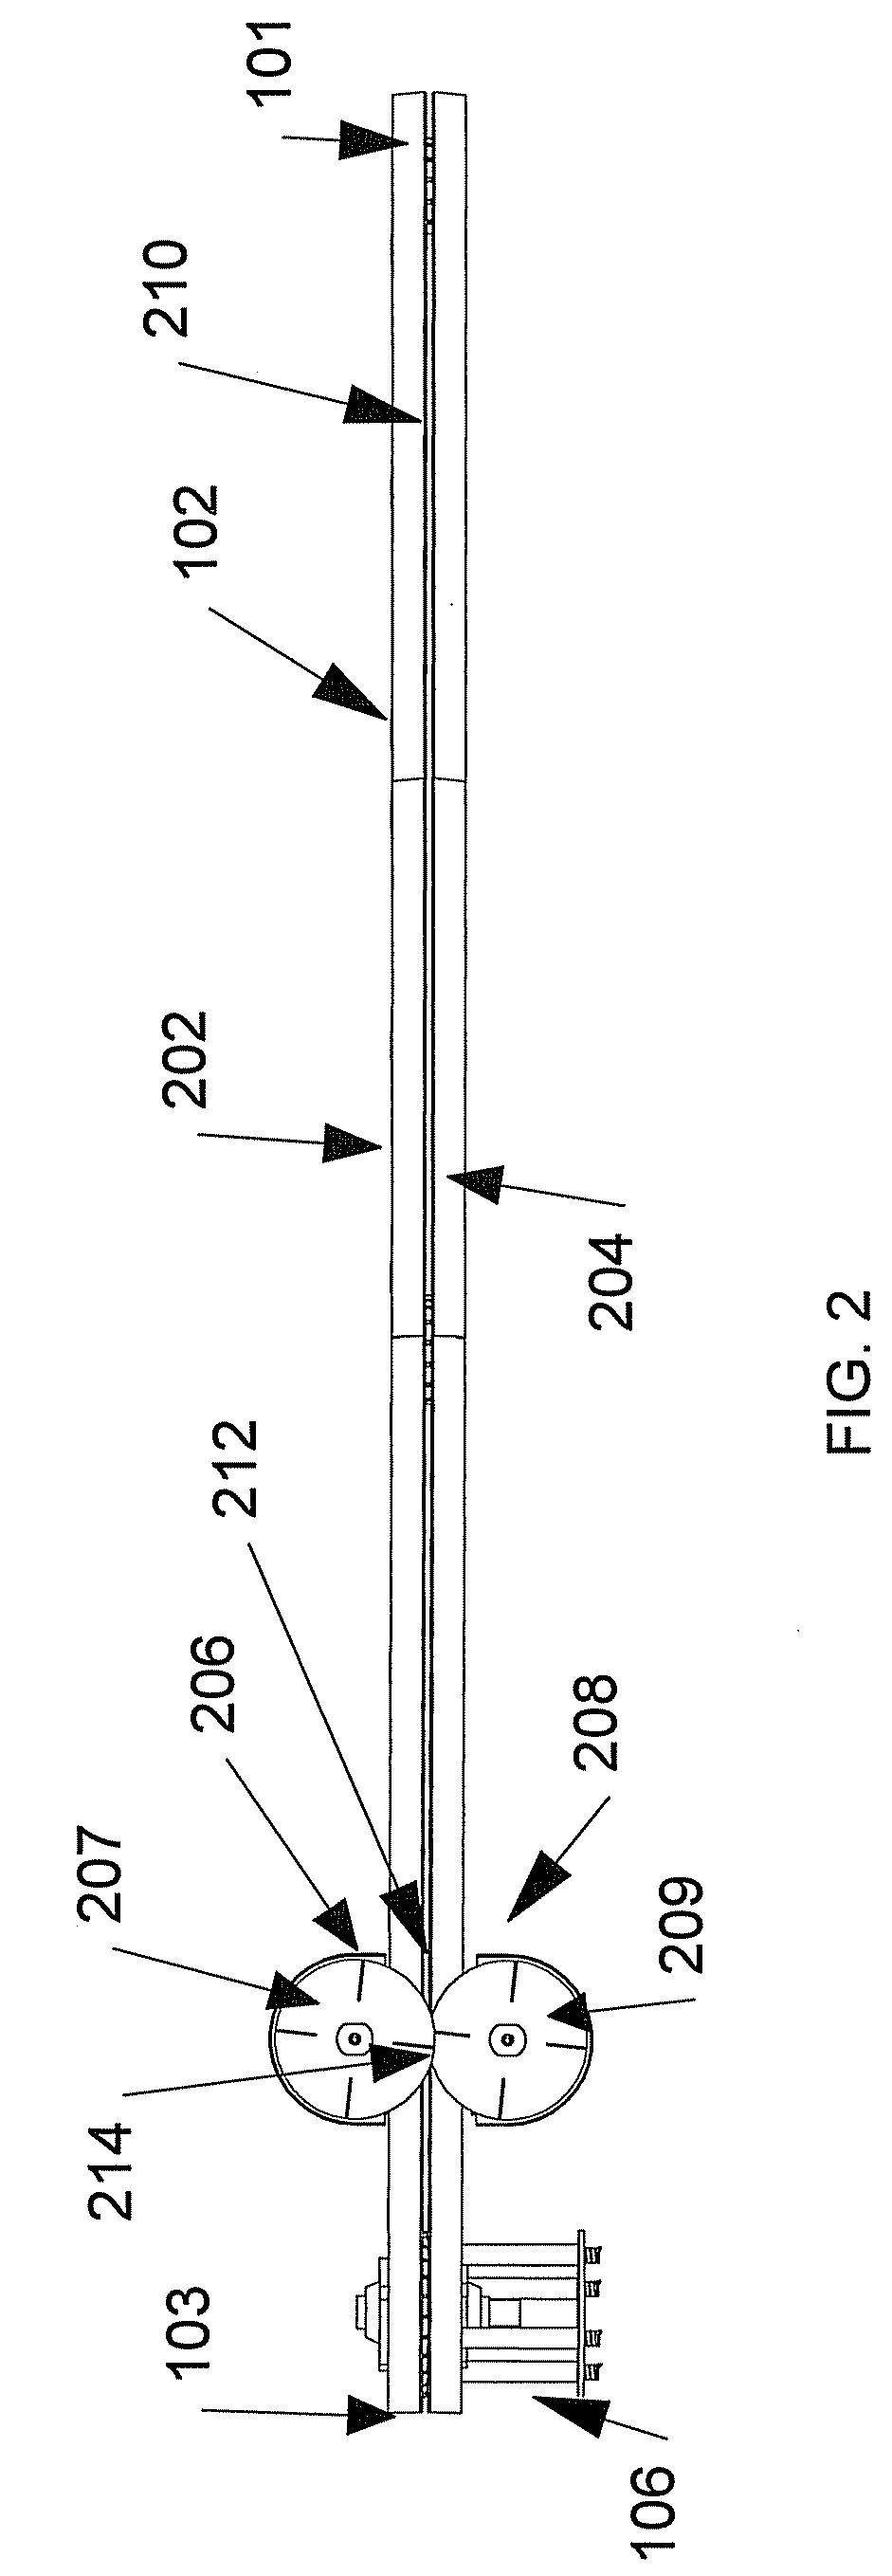 Method and apparatus for processing gizzards